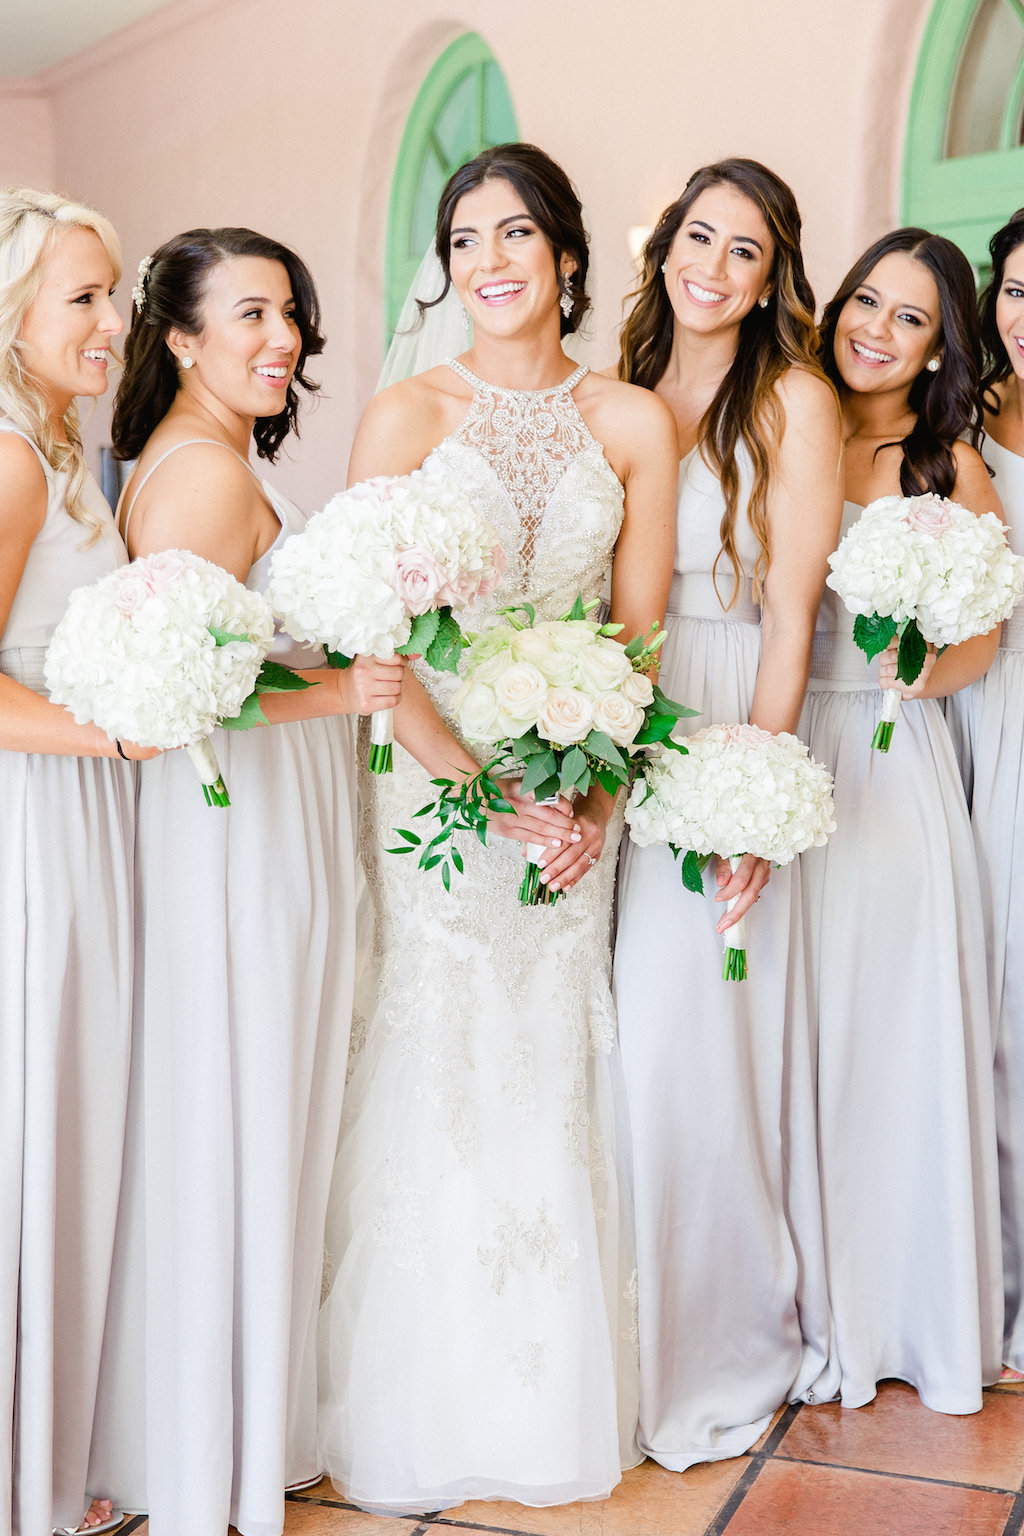 Bride and Bridesmaids Wedding Portrait in High Halter Lace and Rhinestone Bodice Wedding Dress, and Grey Bridesmaids Dresses with White Floral Bouquets | Tampa Hair and Makeup Artist Femme Akoi | St. Petersburg Photographer Ailyn La Torre Photography